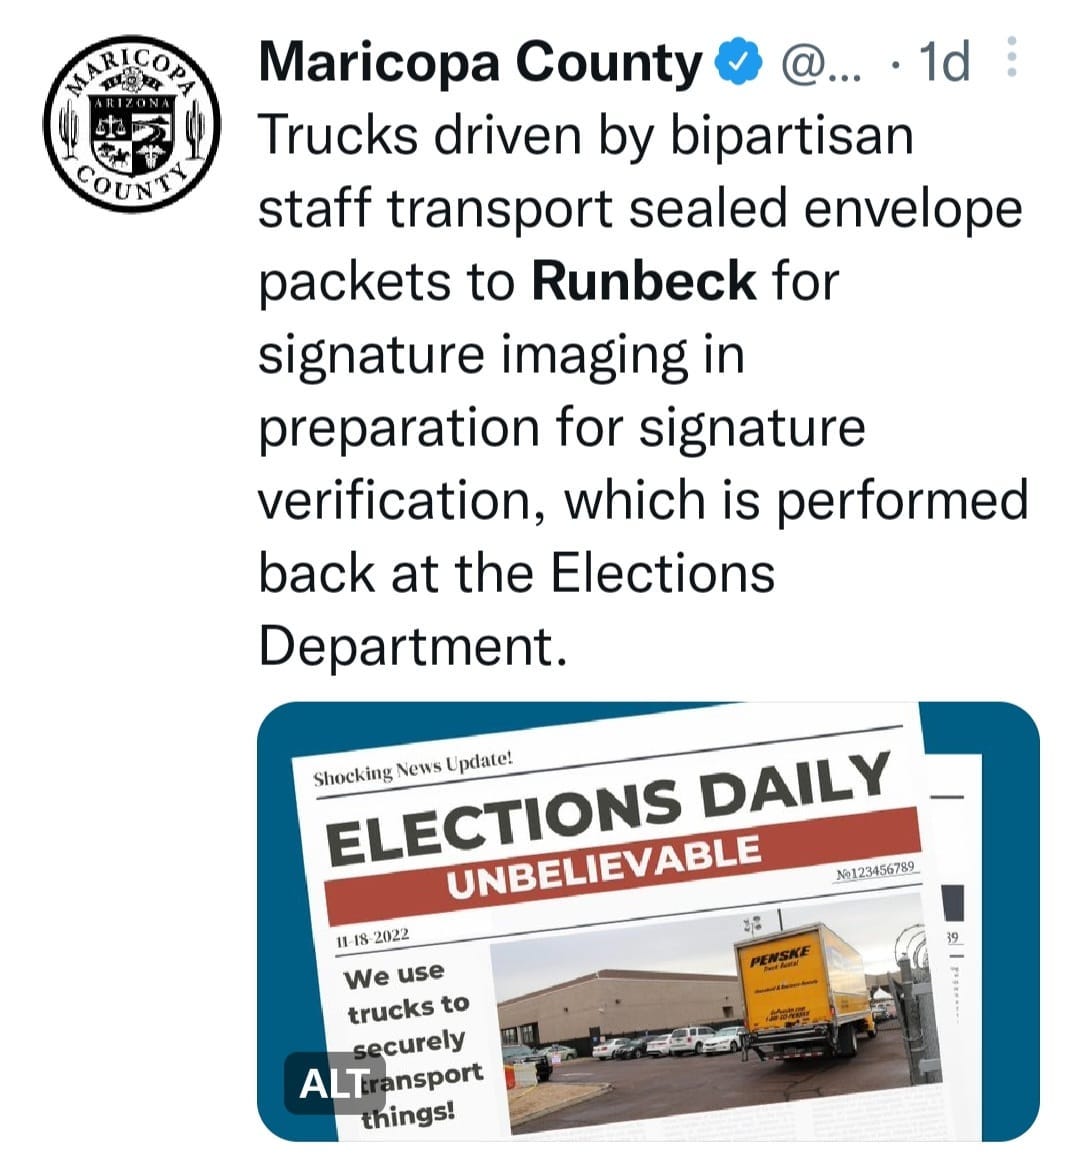 May be an image of text that says 'MARICOPA COUNT Maricopa County 1d Trucks driven by bipartisan staff transport sealed envelope packets to Runbeck for signature imaging in preparation for signature verification, which is performed back at the Elections Department. Shocking ELECTIONS News Update! DAILY UNBELIEVABLE 2022 We use trucks to securely ALT ansport things! Mo123456789'